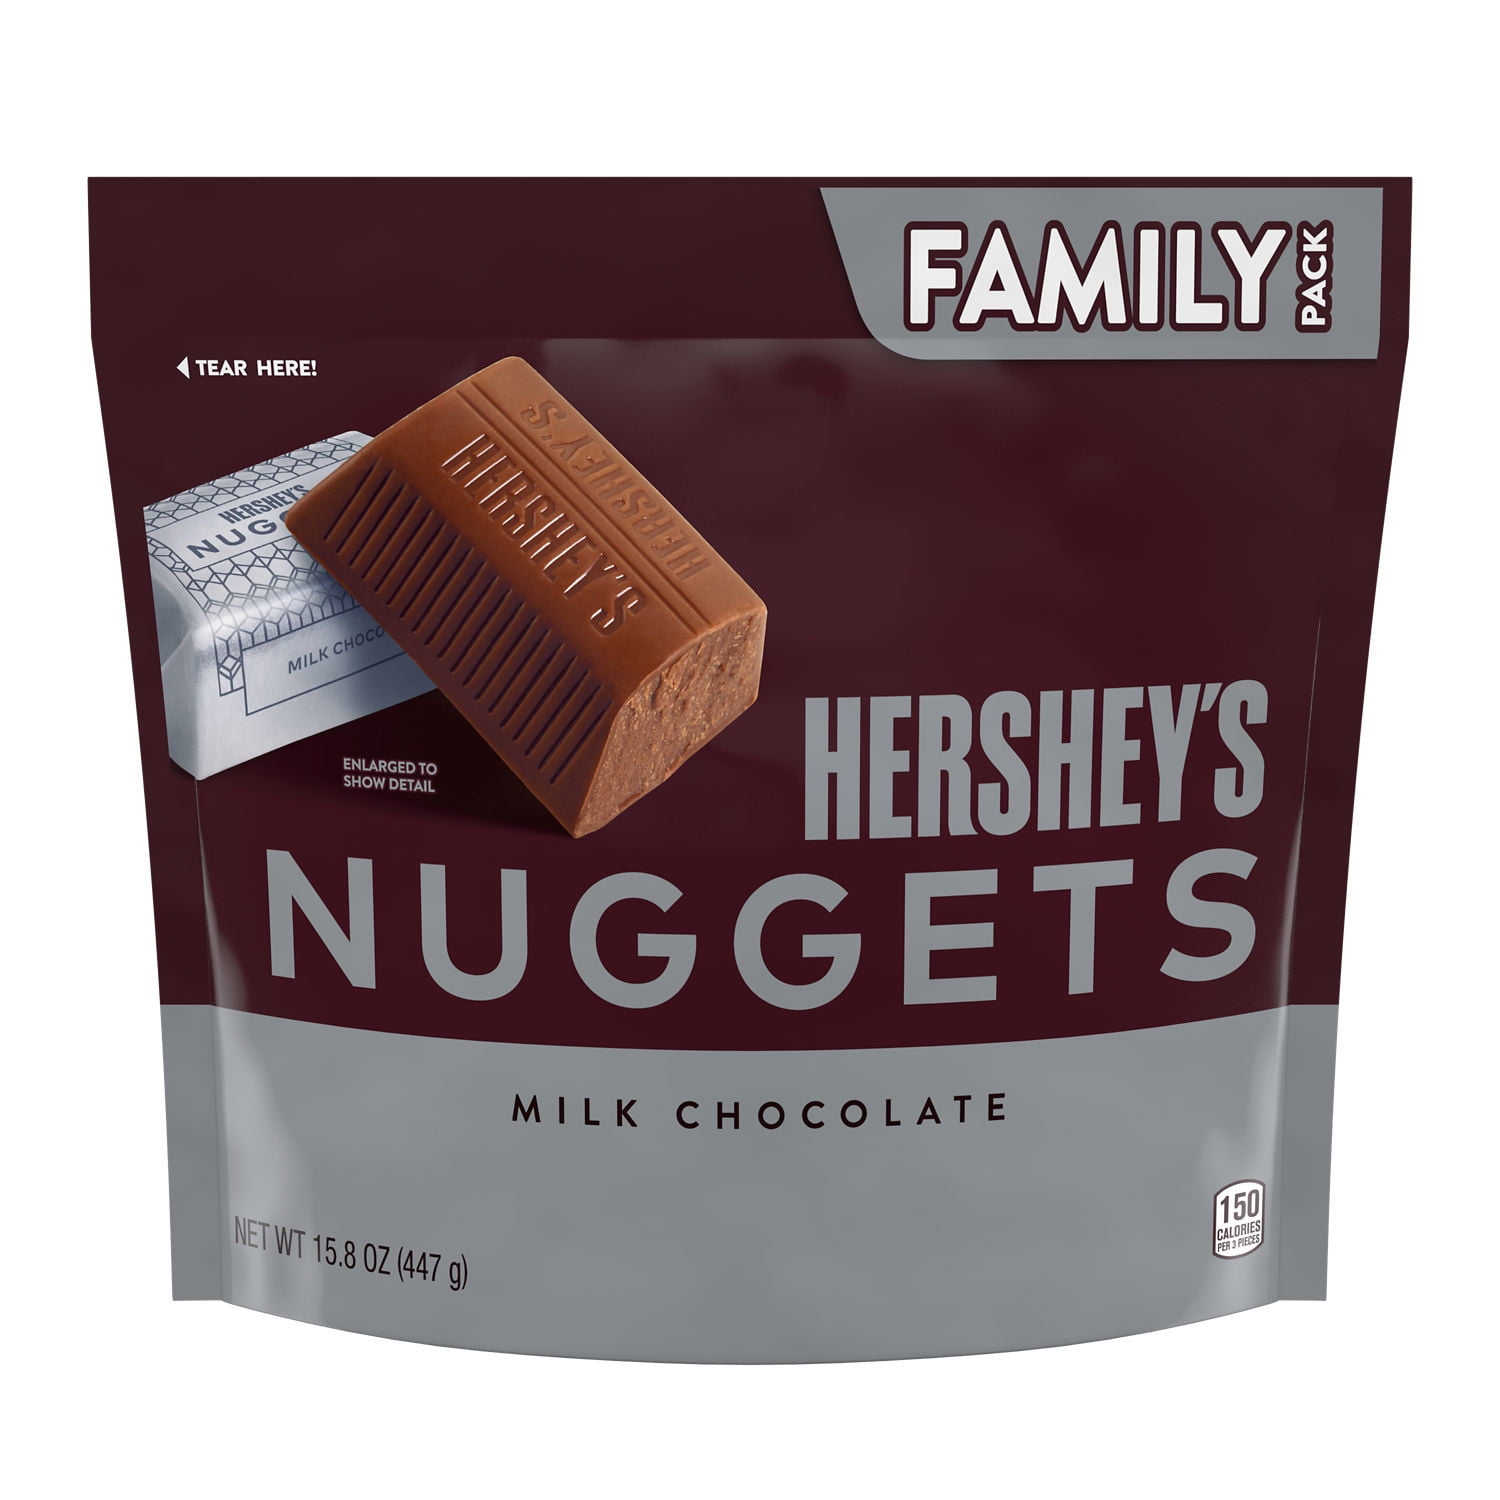 HERSHEY'S NUGGETS Milk Chocolate Silver Foil, Easter Candy Family Pack, 15.8 oz